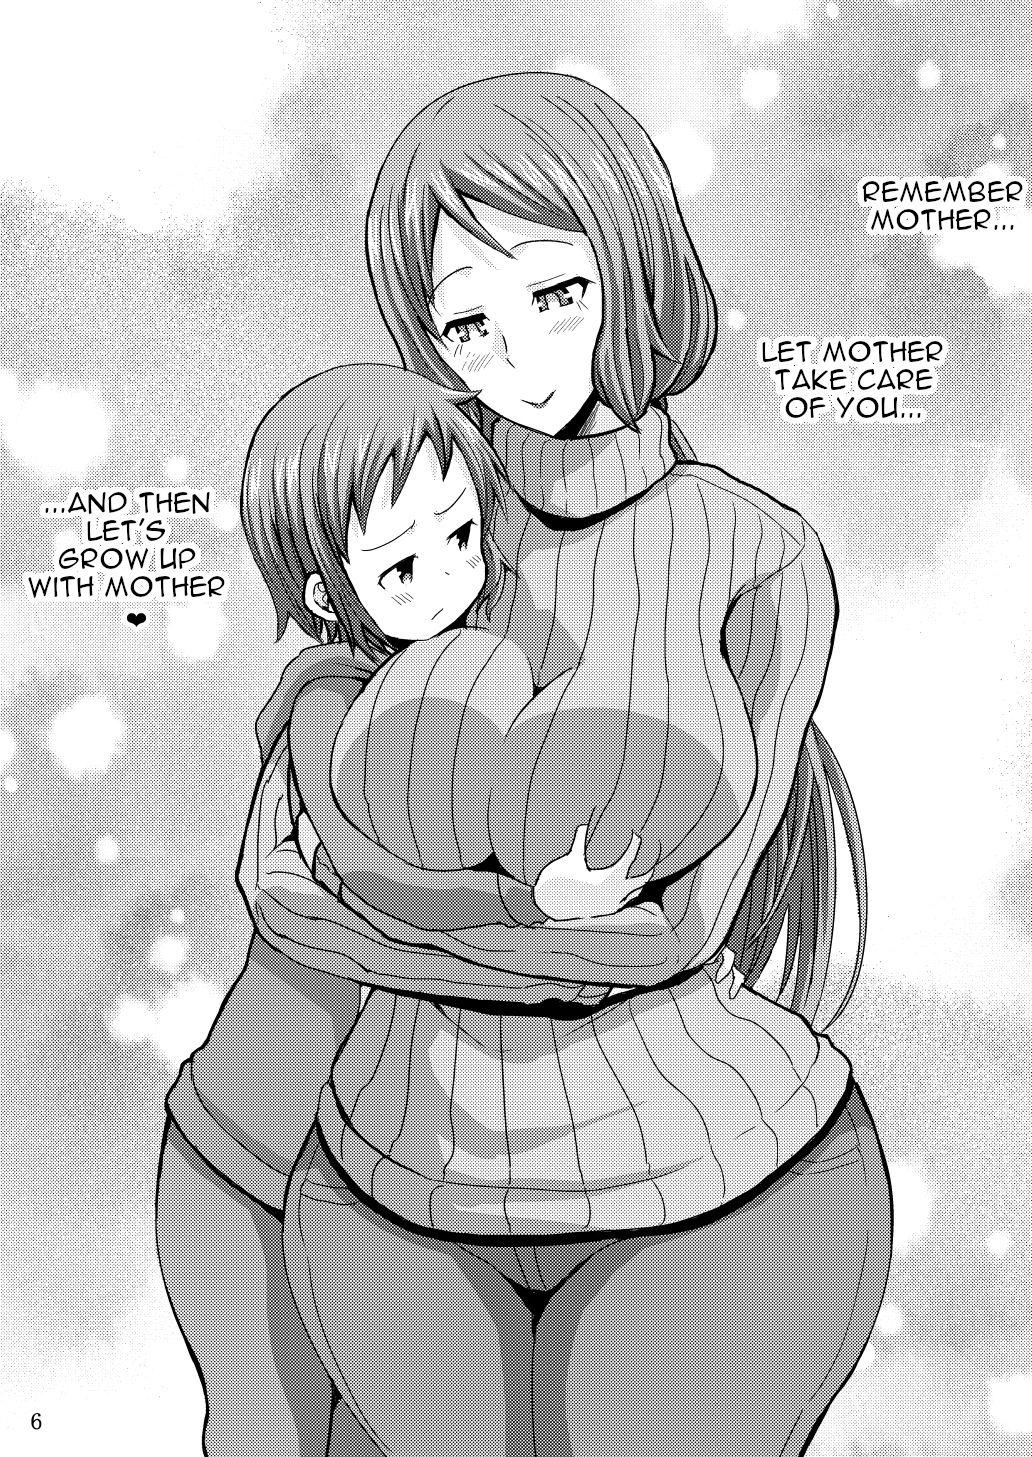 Gayclips Okaa-san to Hagukumimasho | Let's grow up with mother - Gundam build fighters Jap - Page 5